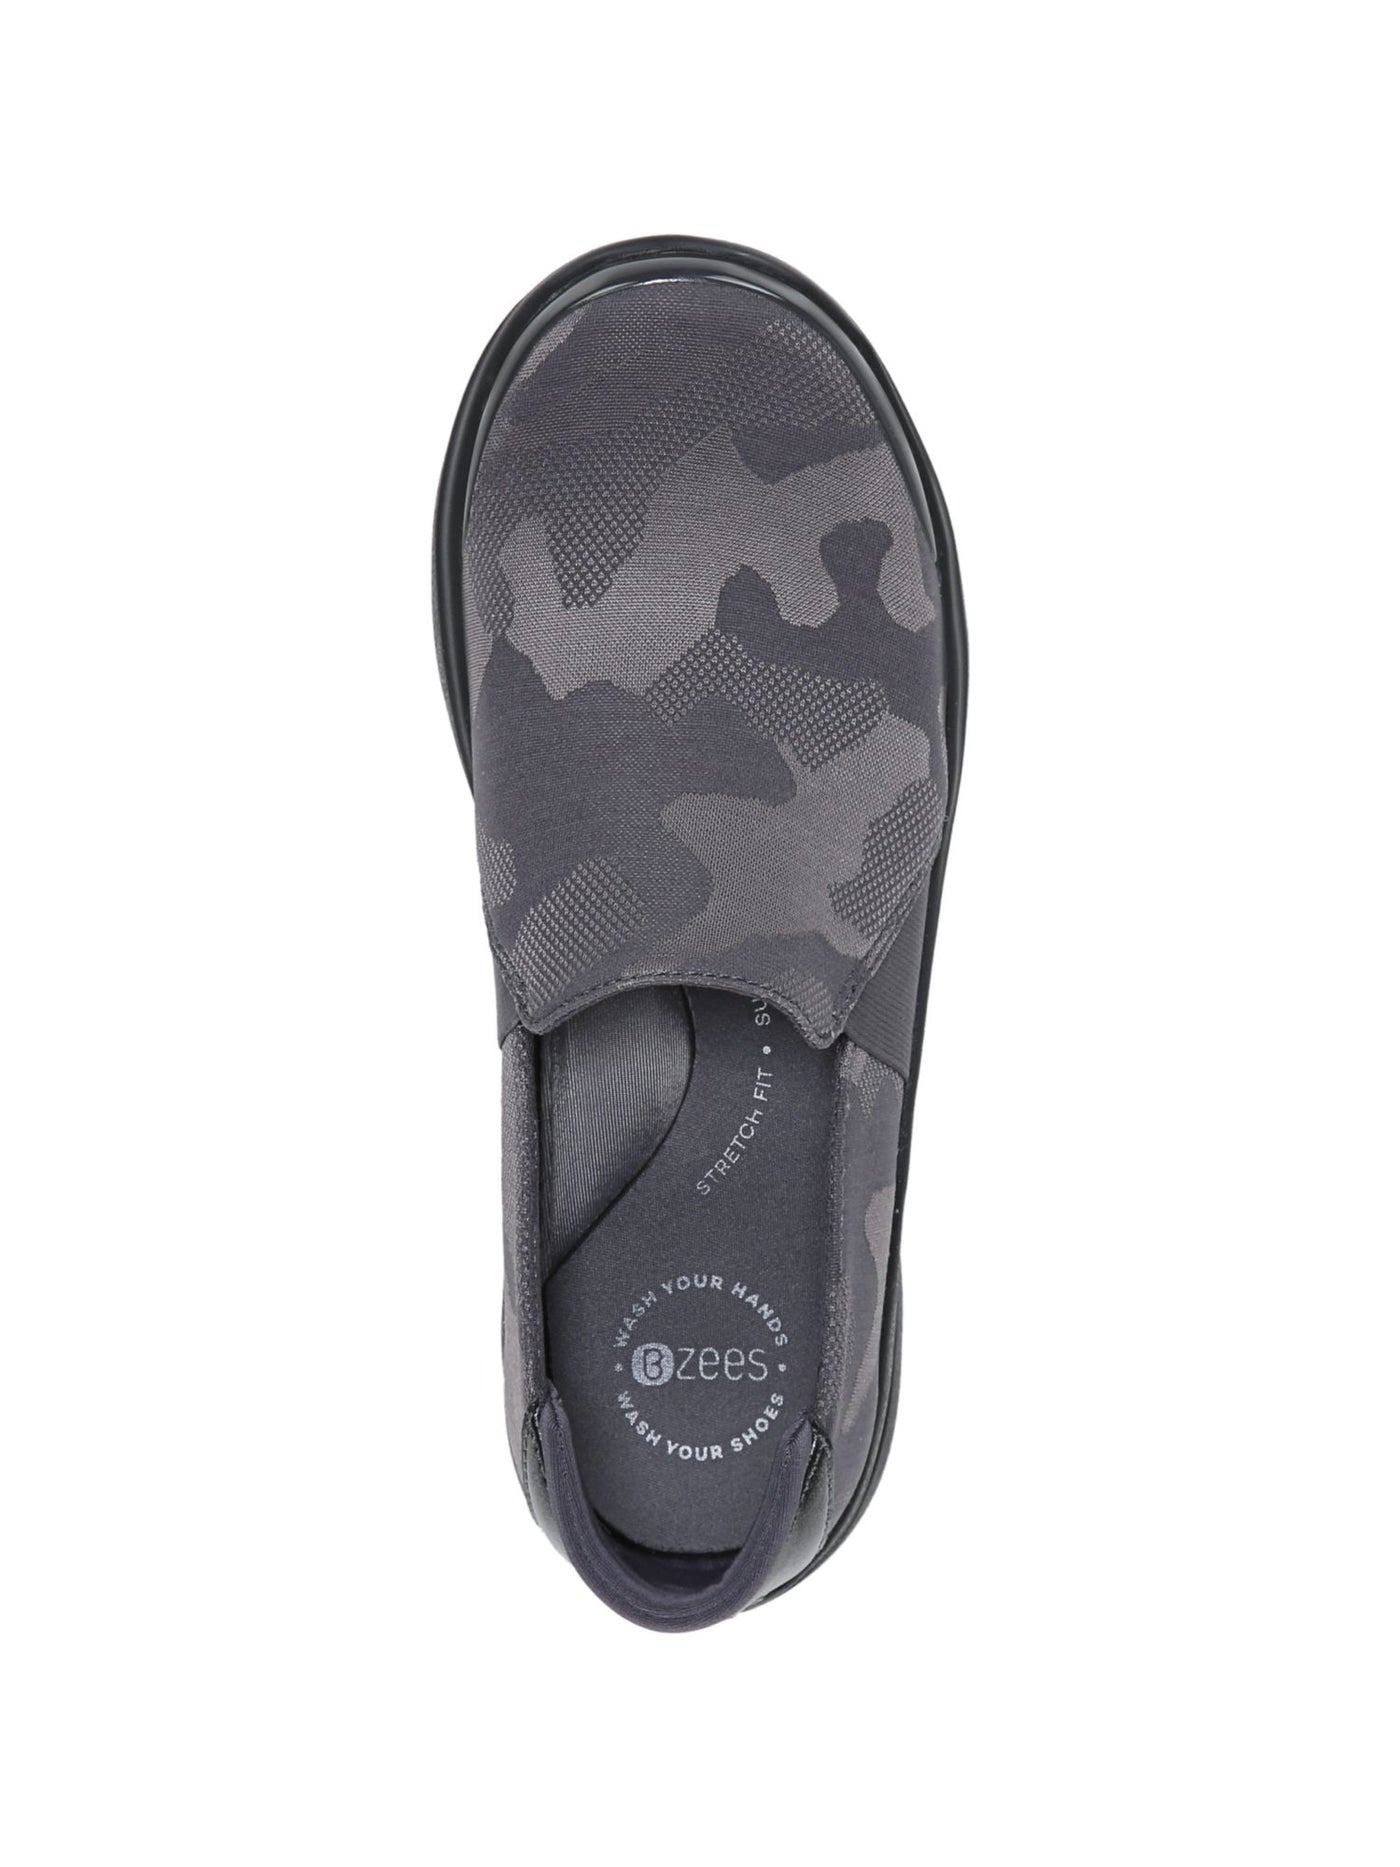 BZEES Womens Navy Camouflage Odor Control Lightweight Arch Support Padded Jitterbug Round Toe Wedge Slip On Sneakers Shoes 6 M